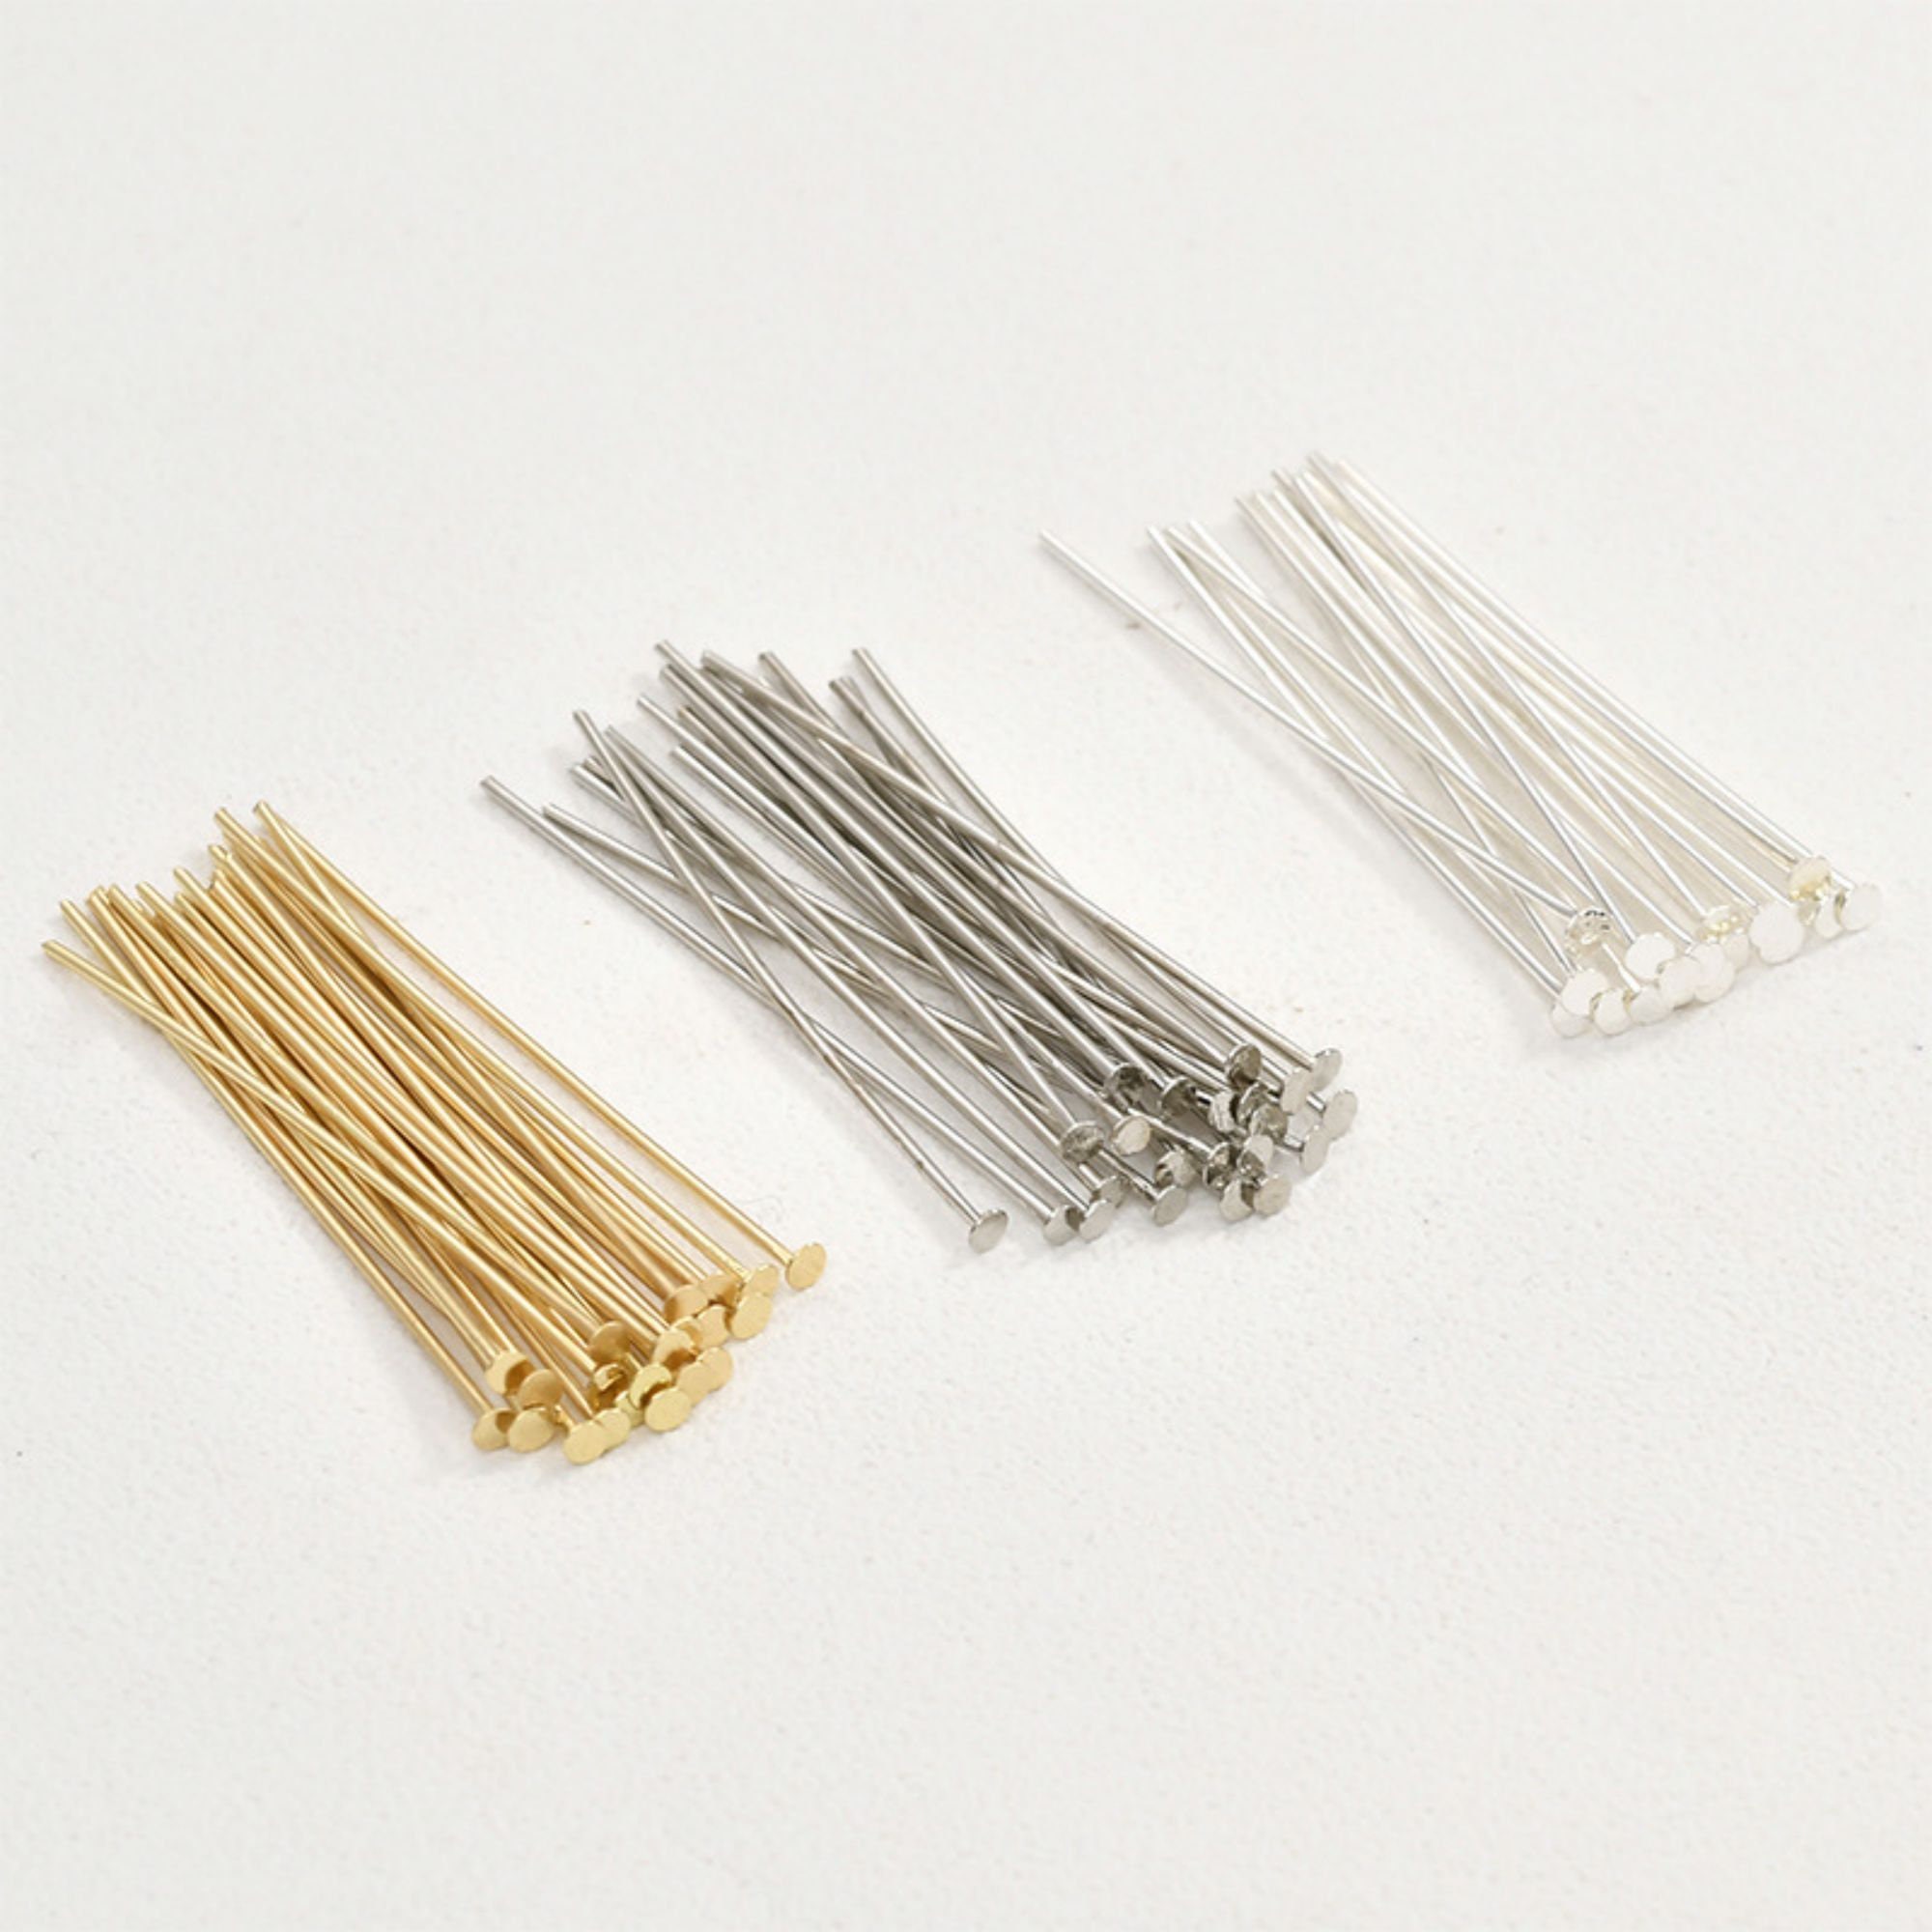 Uxcell 200pcs Flat Head Pins for Jewelry Making 60mm Stainless Steel Flat Head Pins Jewelry Head Pins 22 Gauge Silver, Women's, Size: One Size